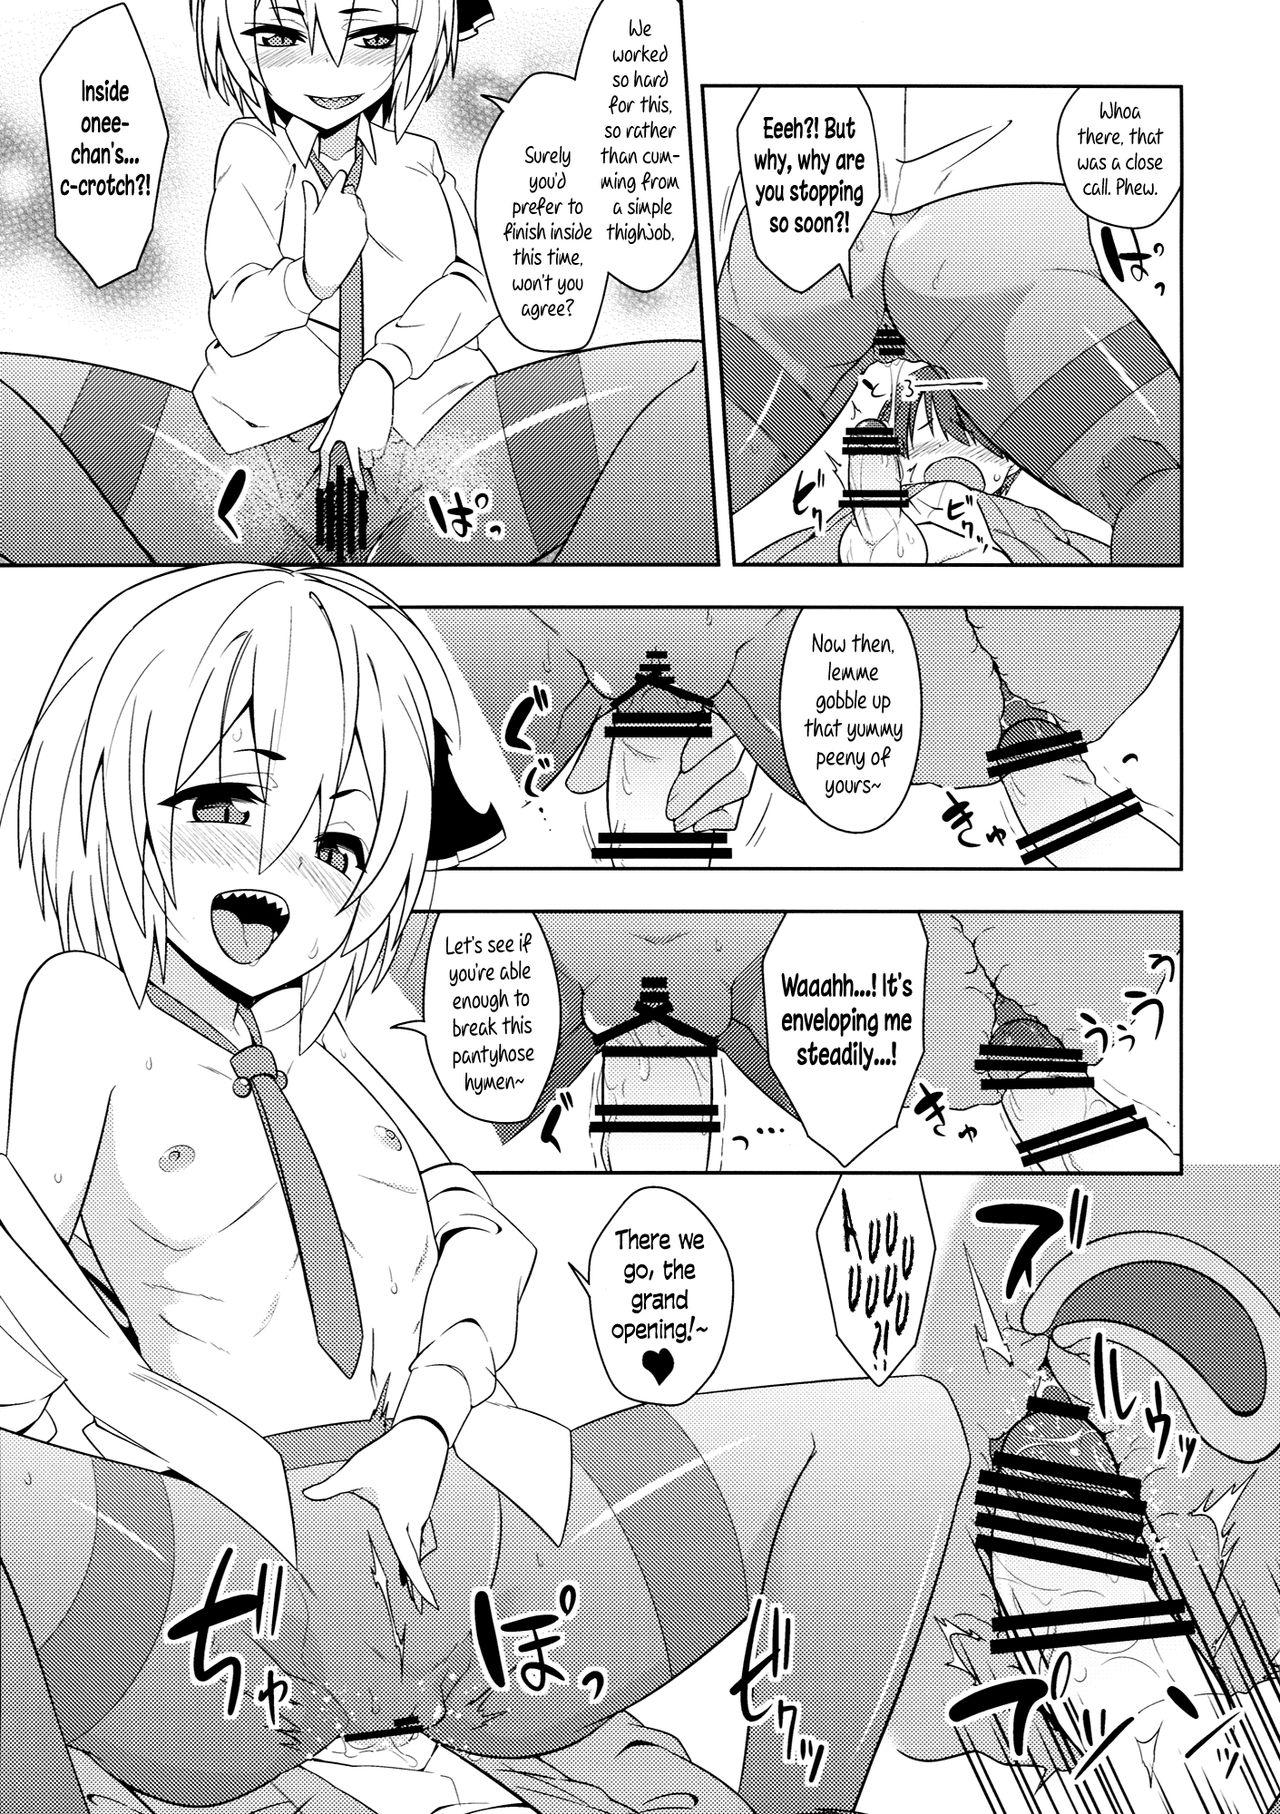 Realitykings Rumia Aratta？| Have you washed, Rumia? - Touhou project Bigbooty - Page 14